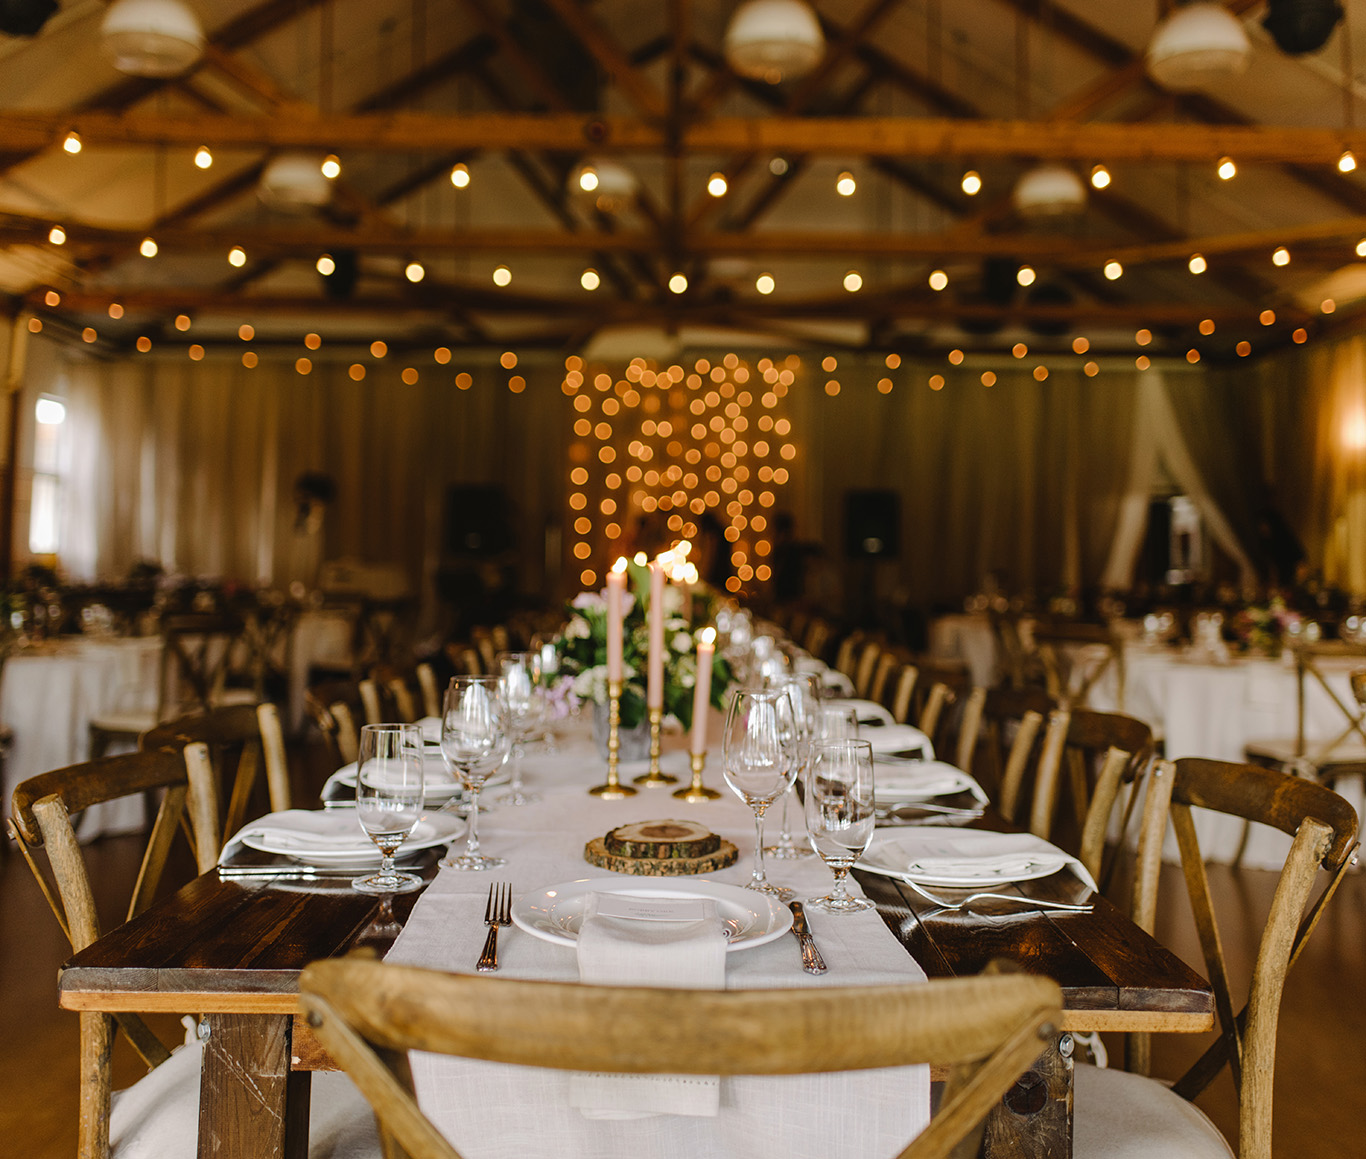 Our Lind Hall offers a rustic and authentic setting for your special day. The Lind Hall is large and spacious with wooden beams on the ceiling and holds a maximum of 200 people. 